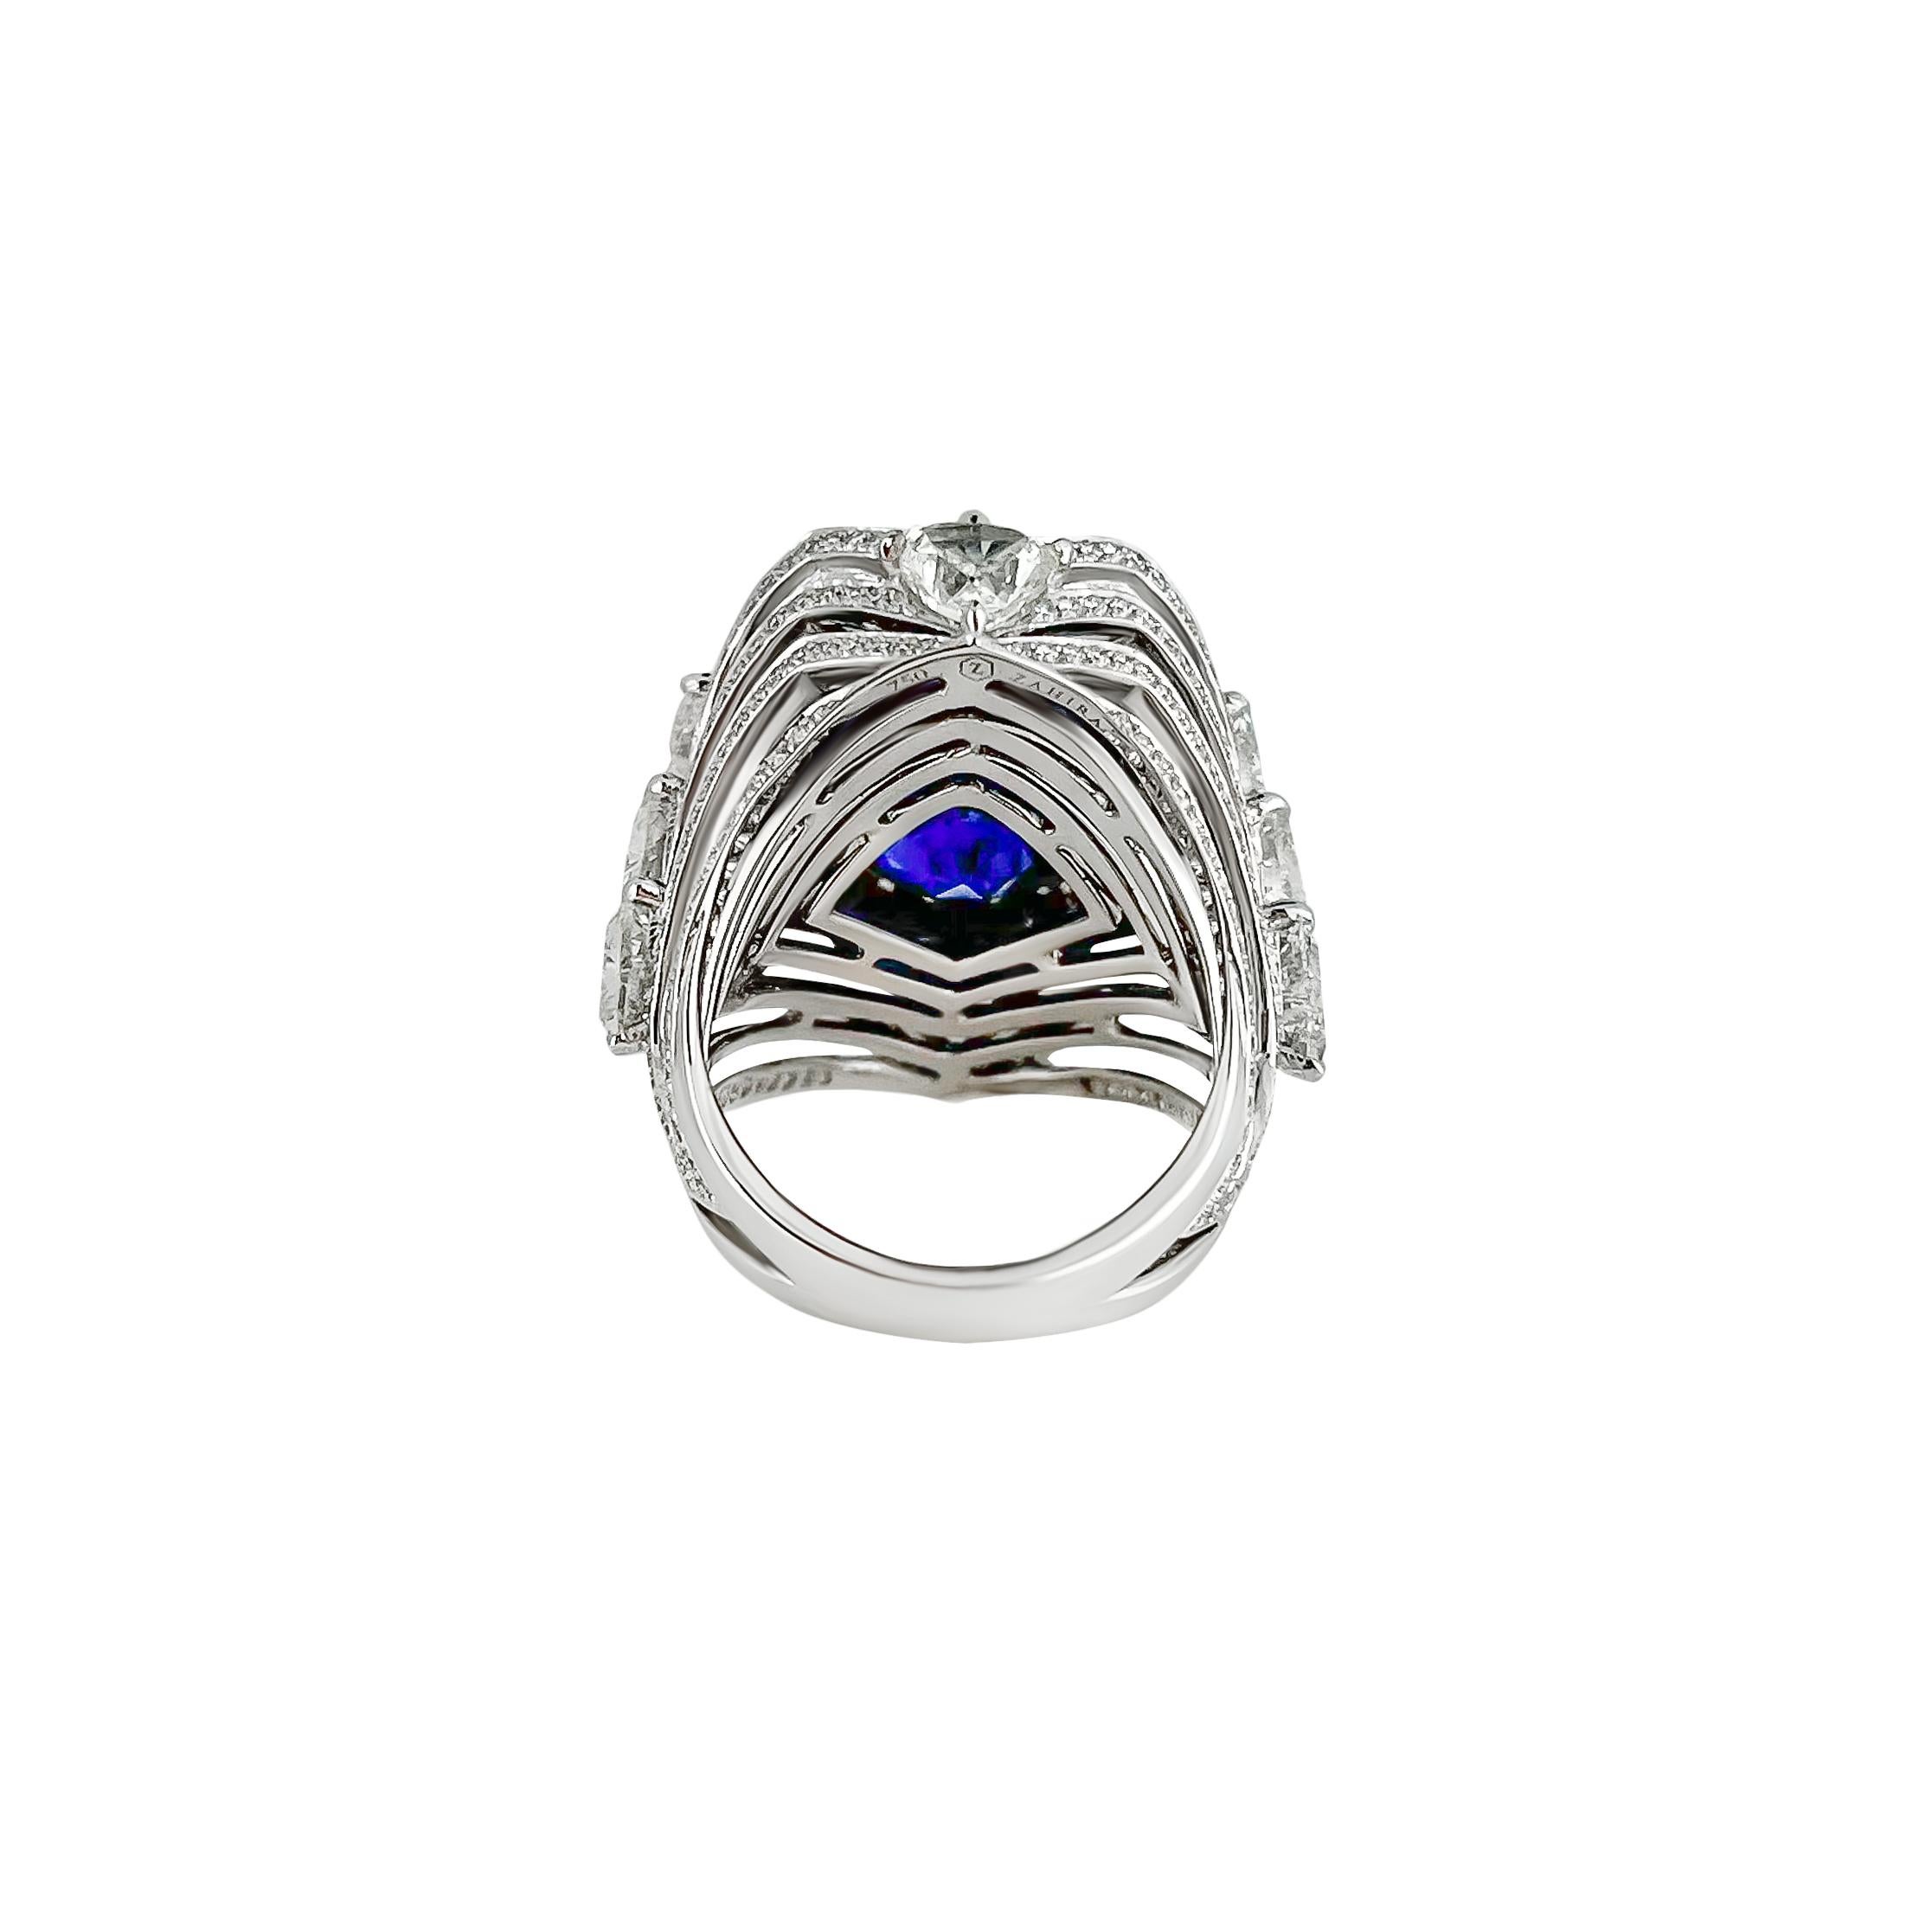 This incredibly rare 22.64 carat Royal Blue Ceylon Sapphire is destined to be a treasured heirloom. The vivid blue sapphire ring is adorned with nearly 5 carats of trillion cut diamonds and surround pave'd diamonds. This is a truly unique and show